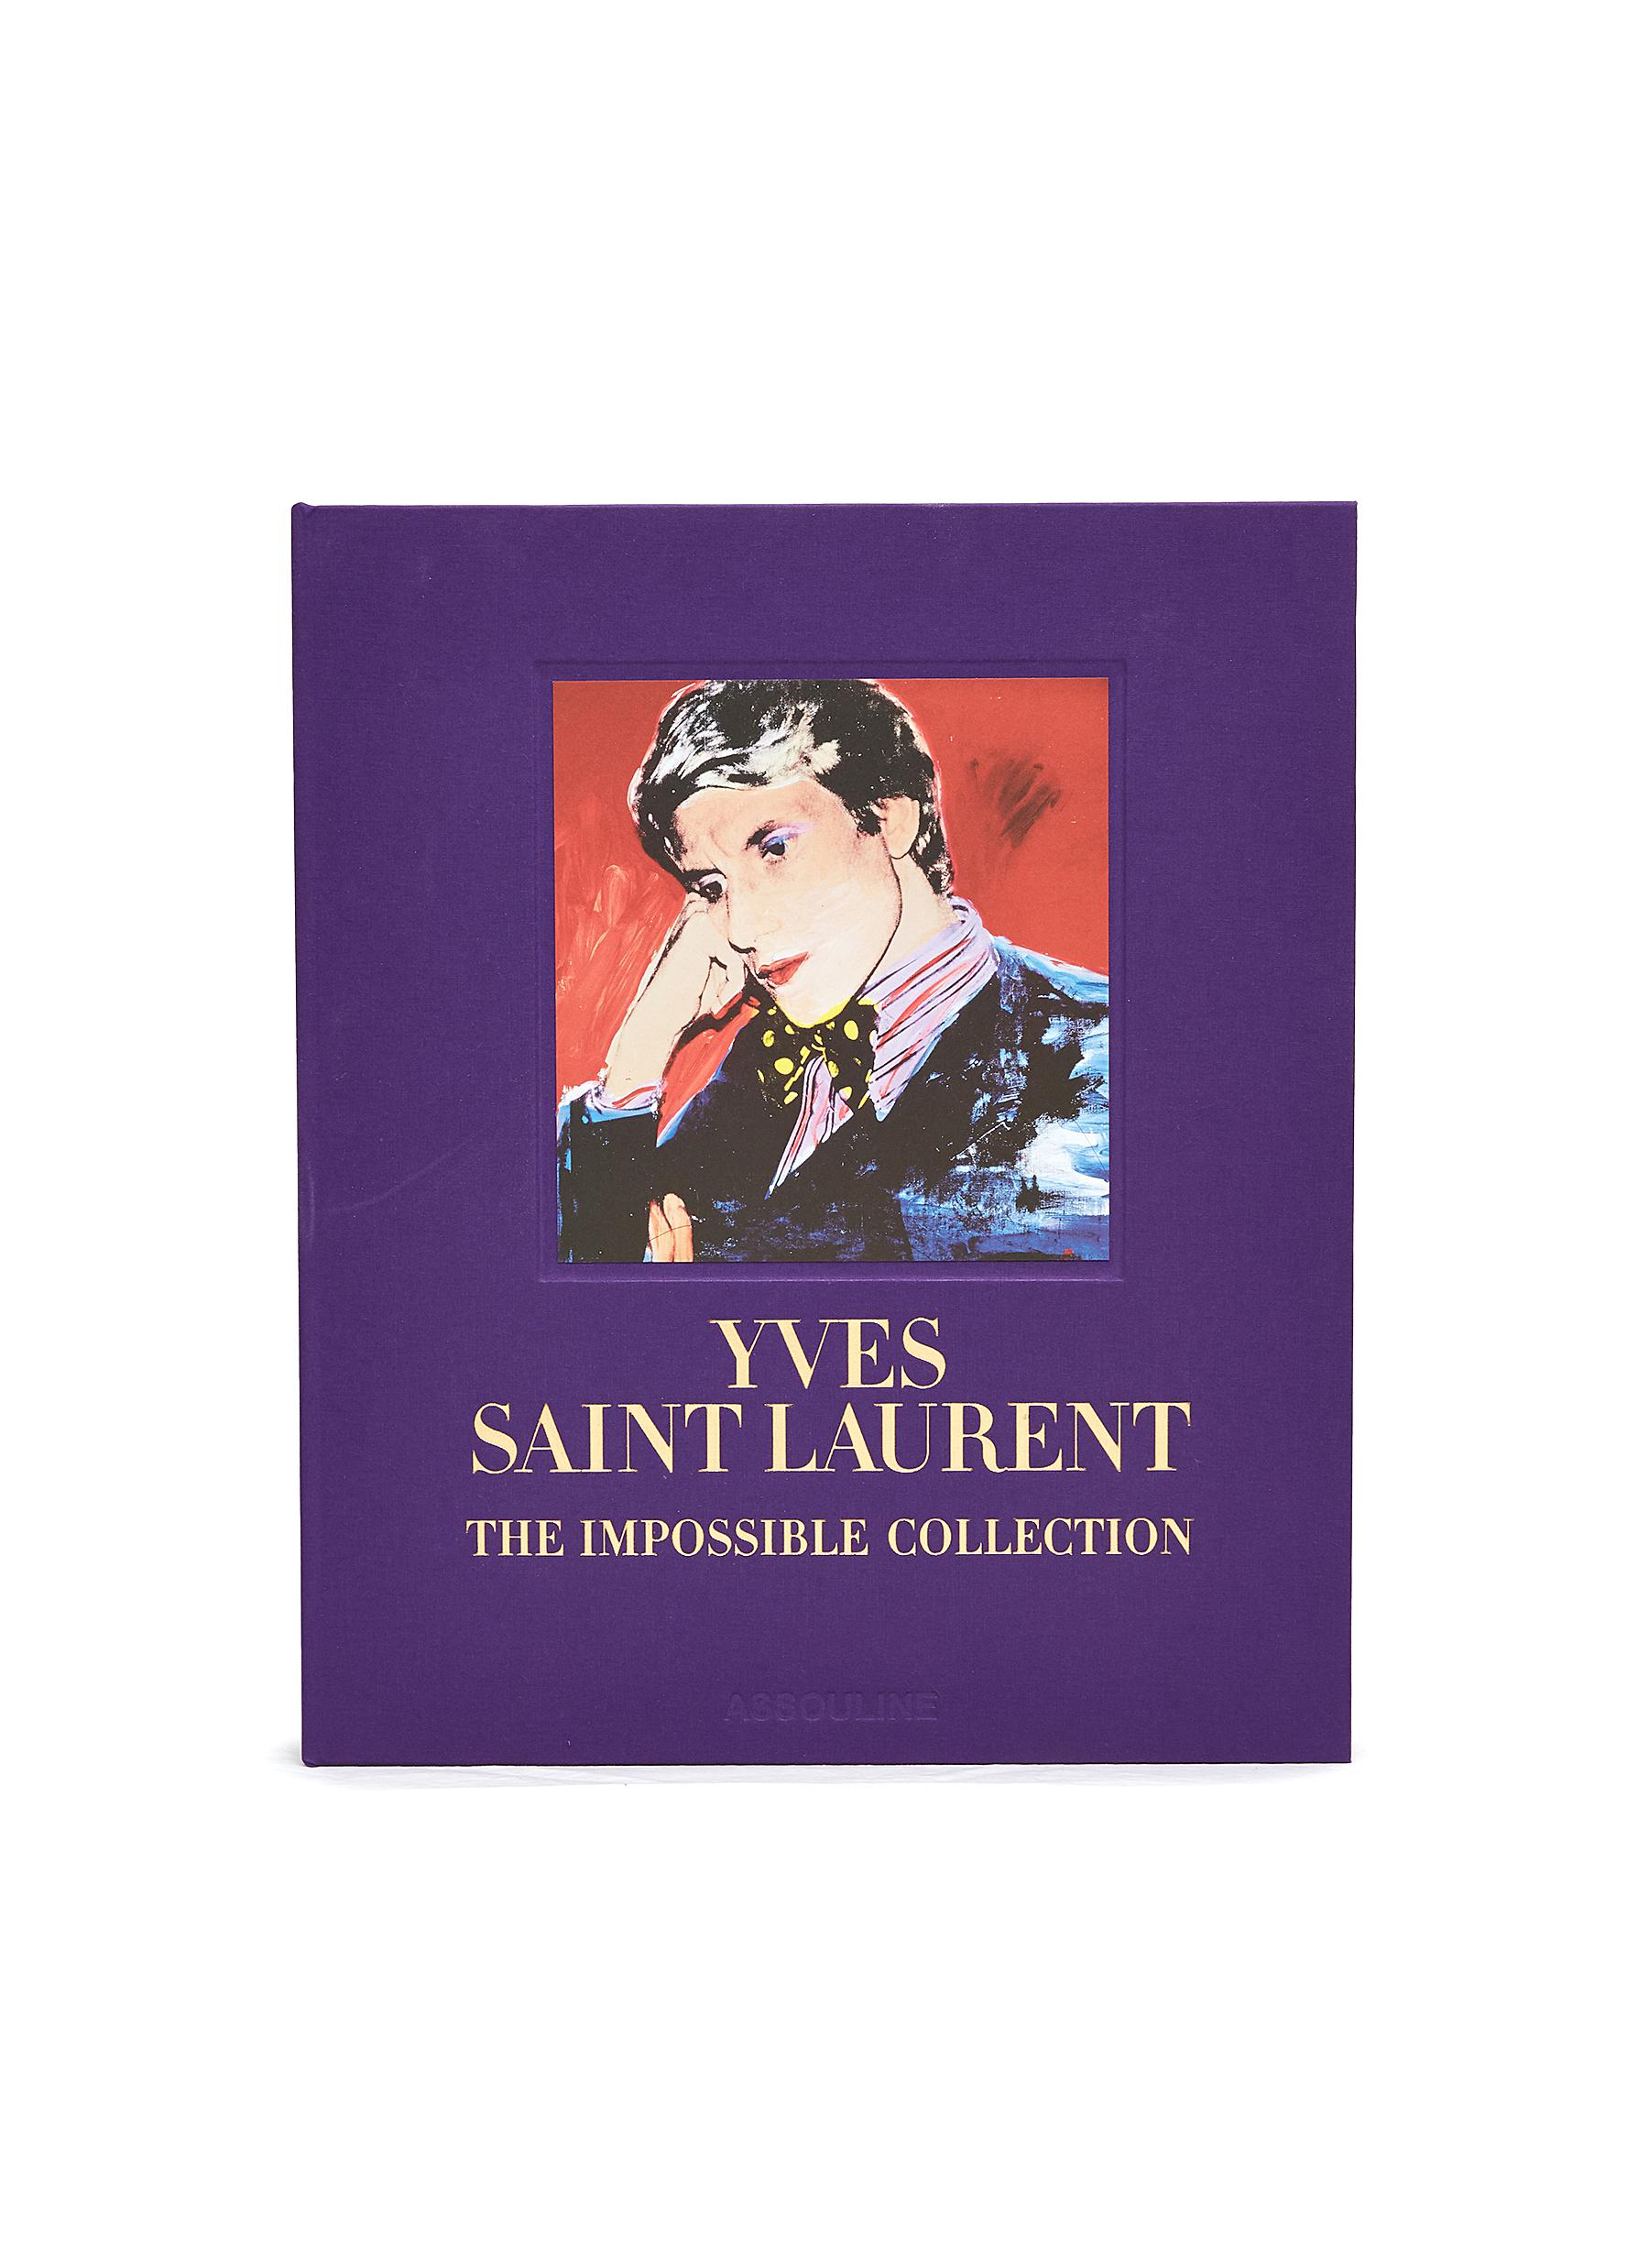 Yves Saint Laurent: The Impossible Collection